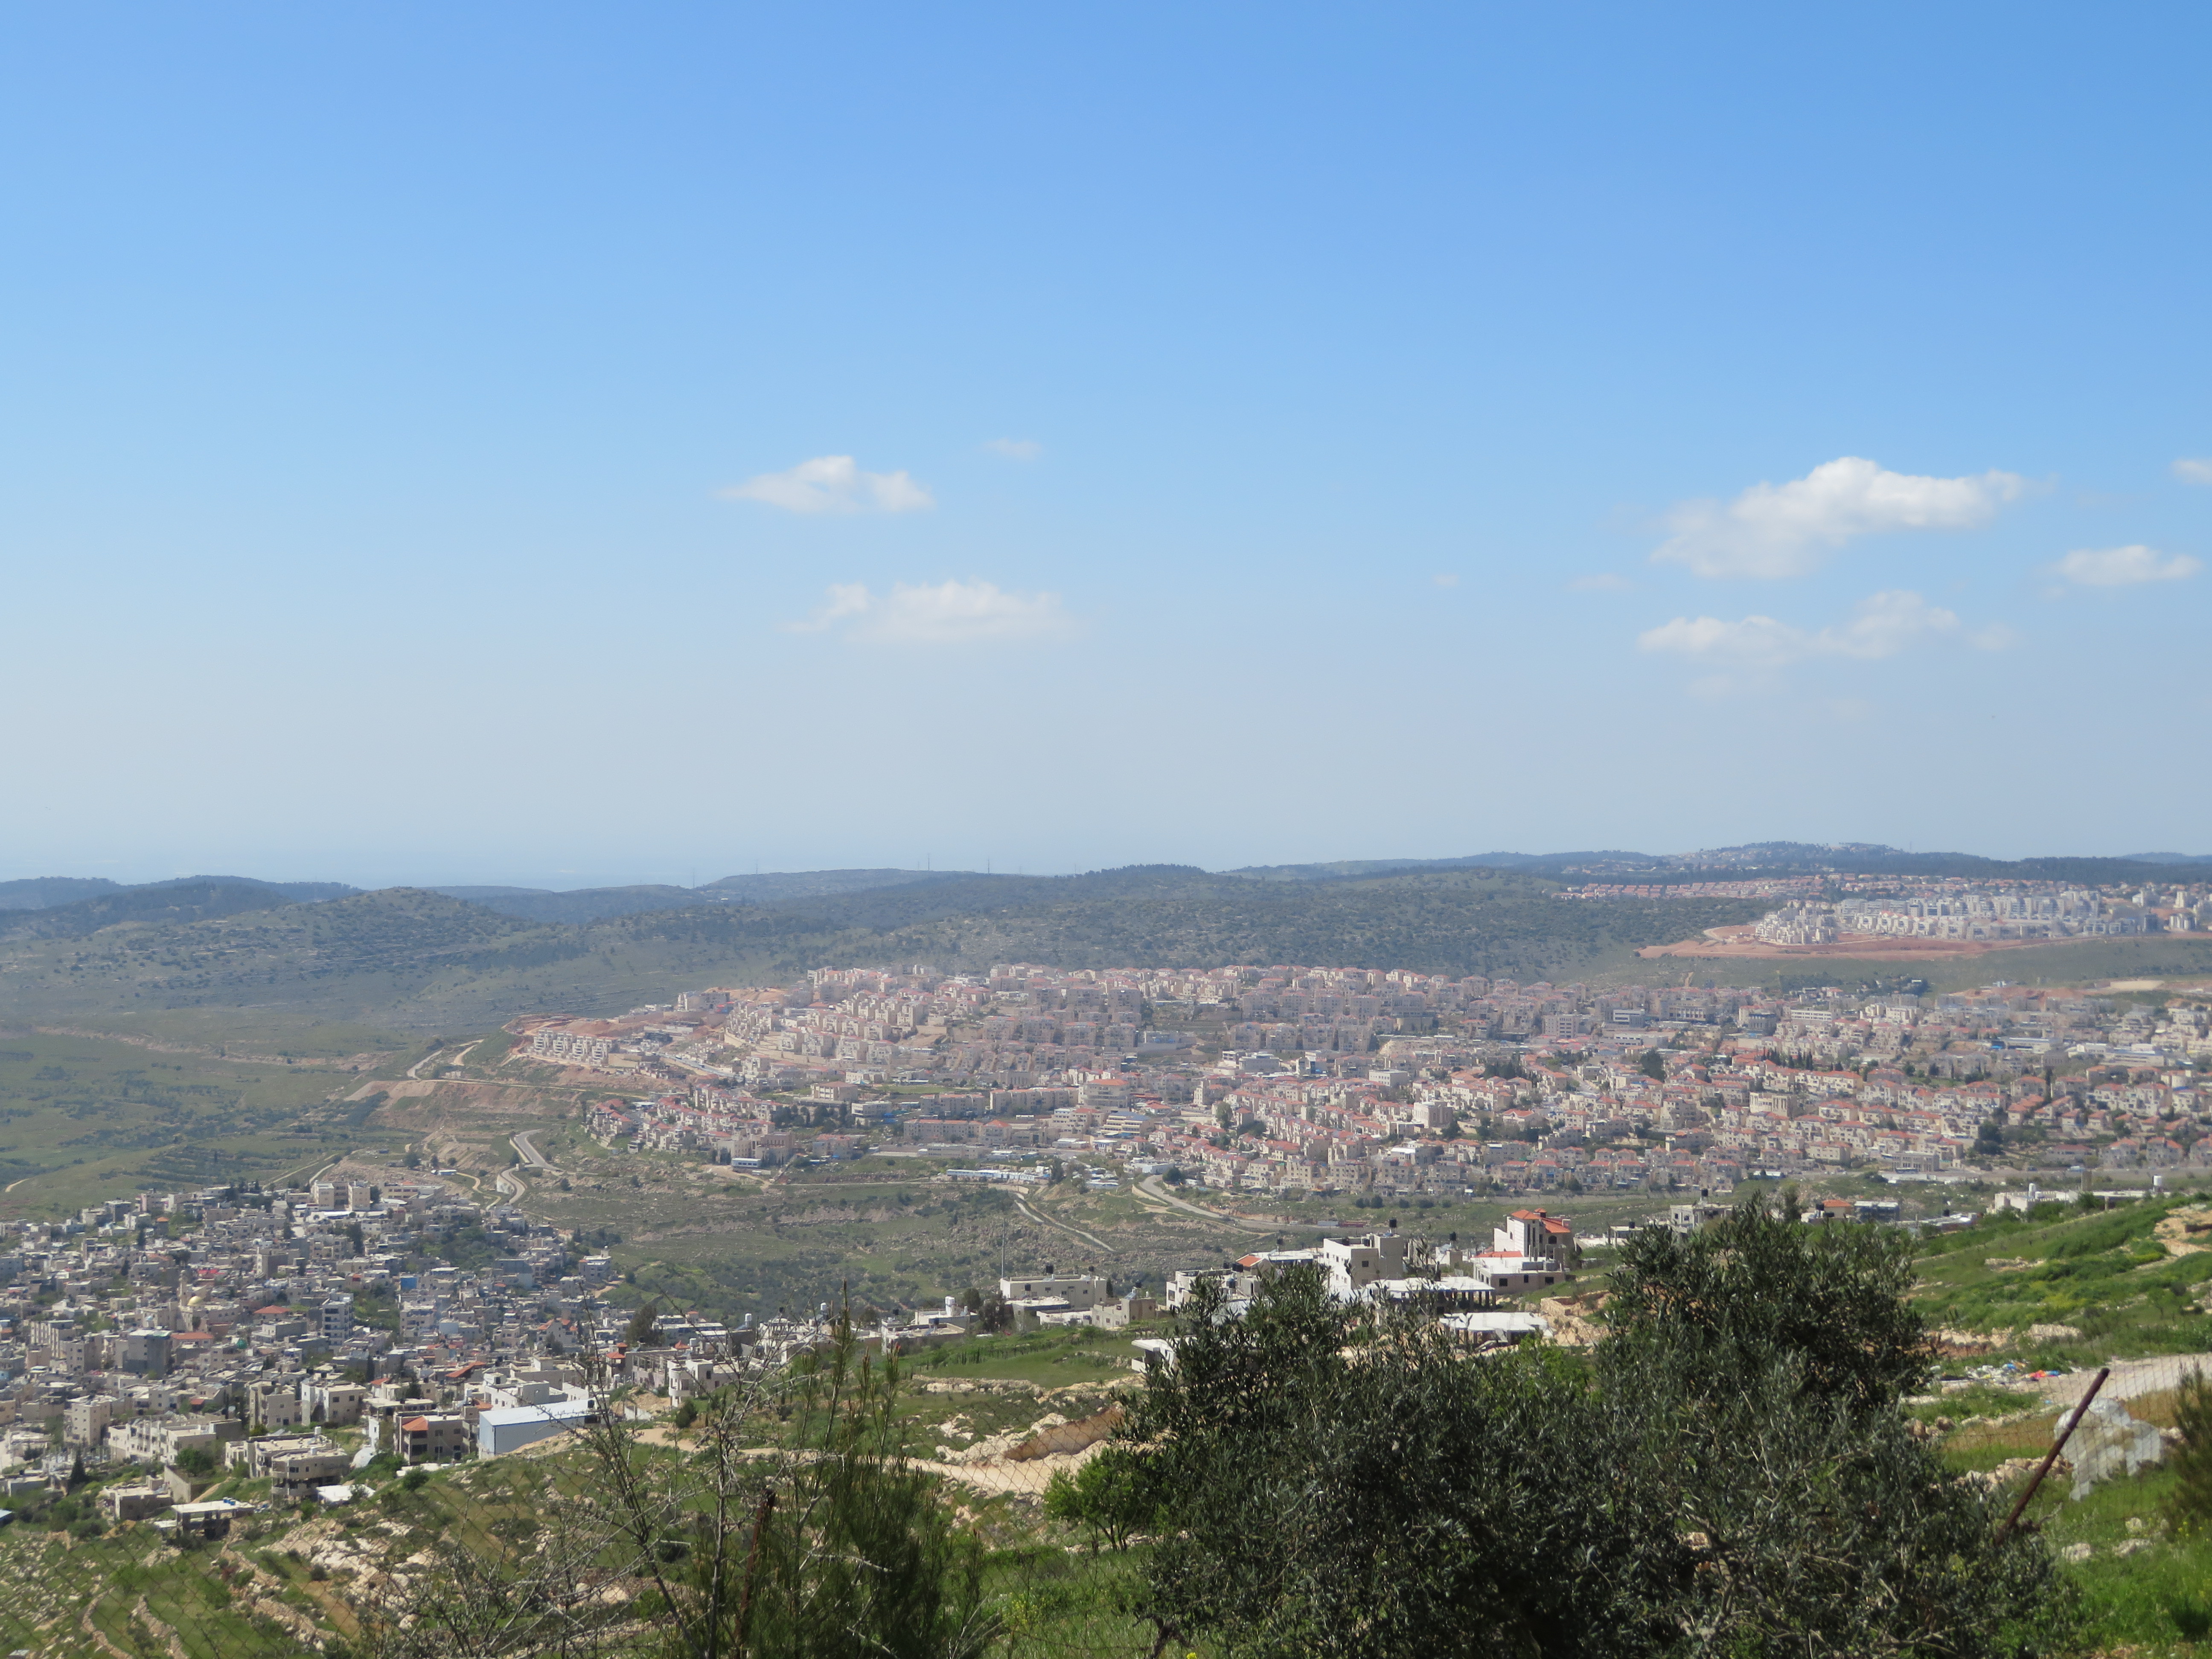 A view from the Tent of Nations farm towards the southwest. The Palestinian village of Nahalin lies in the valley to the left, while the Israeli settlement of Beitar Illit commands the hilltop on the right. Photo: Doug Dicks